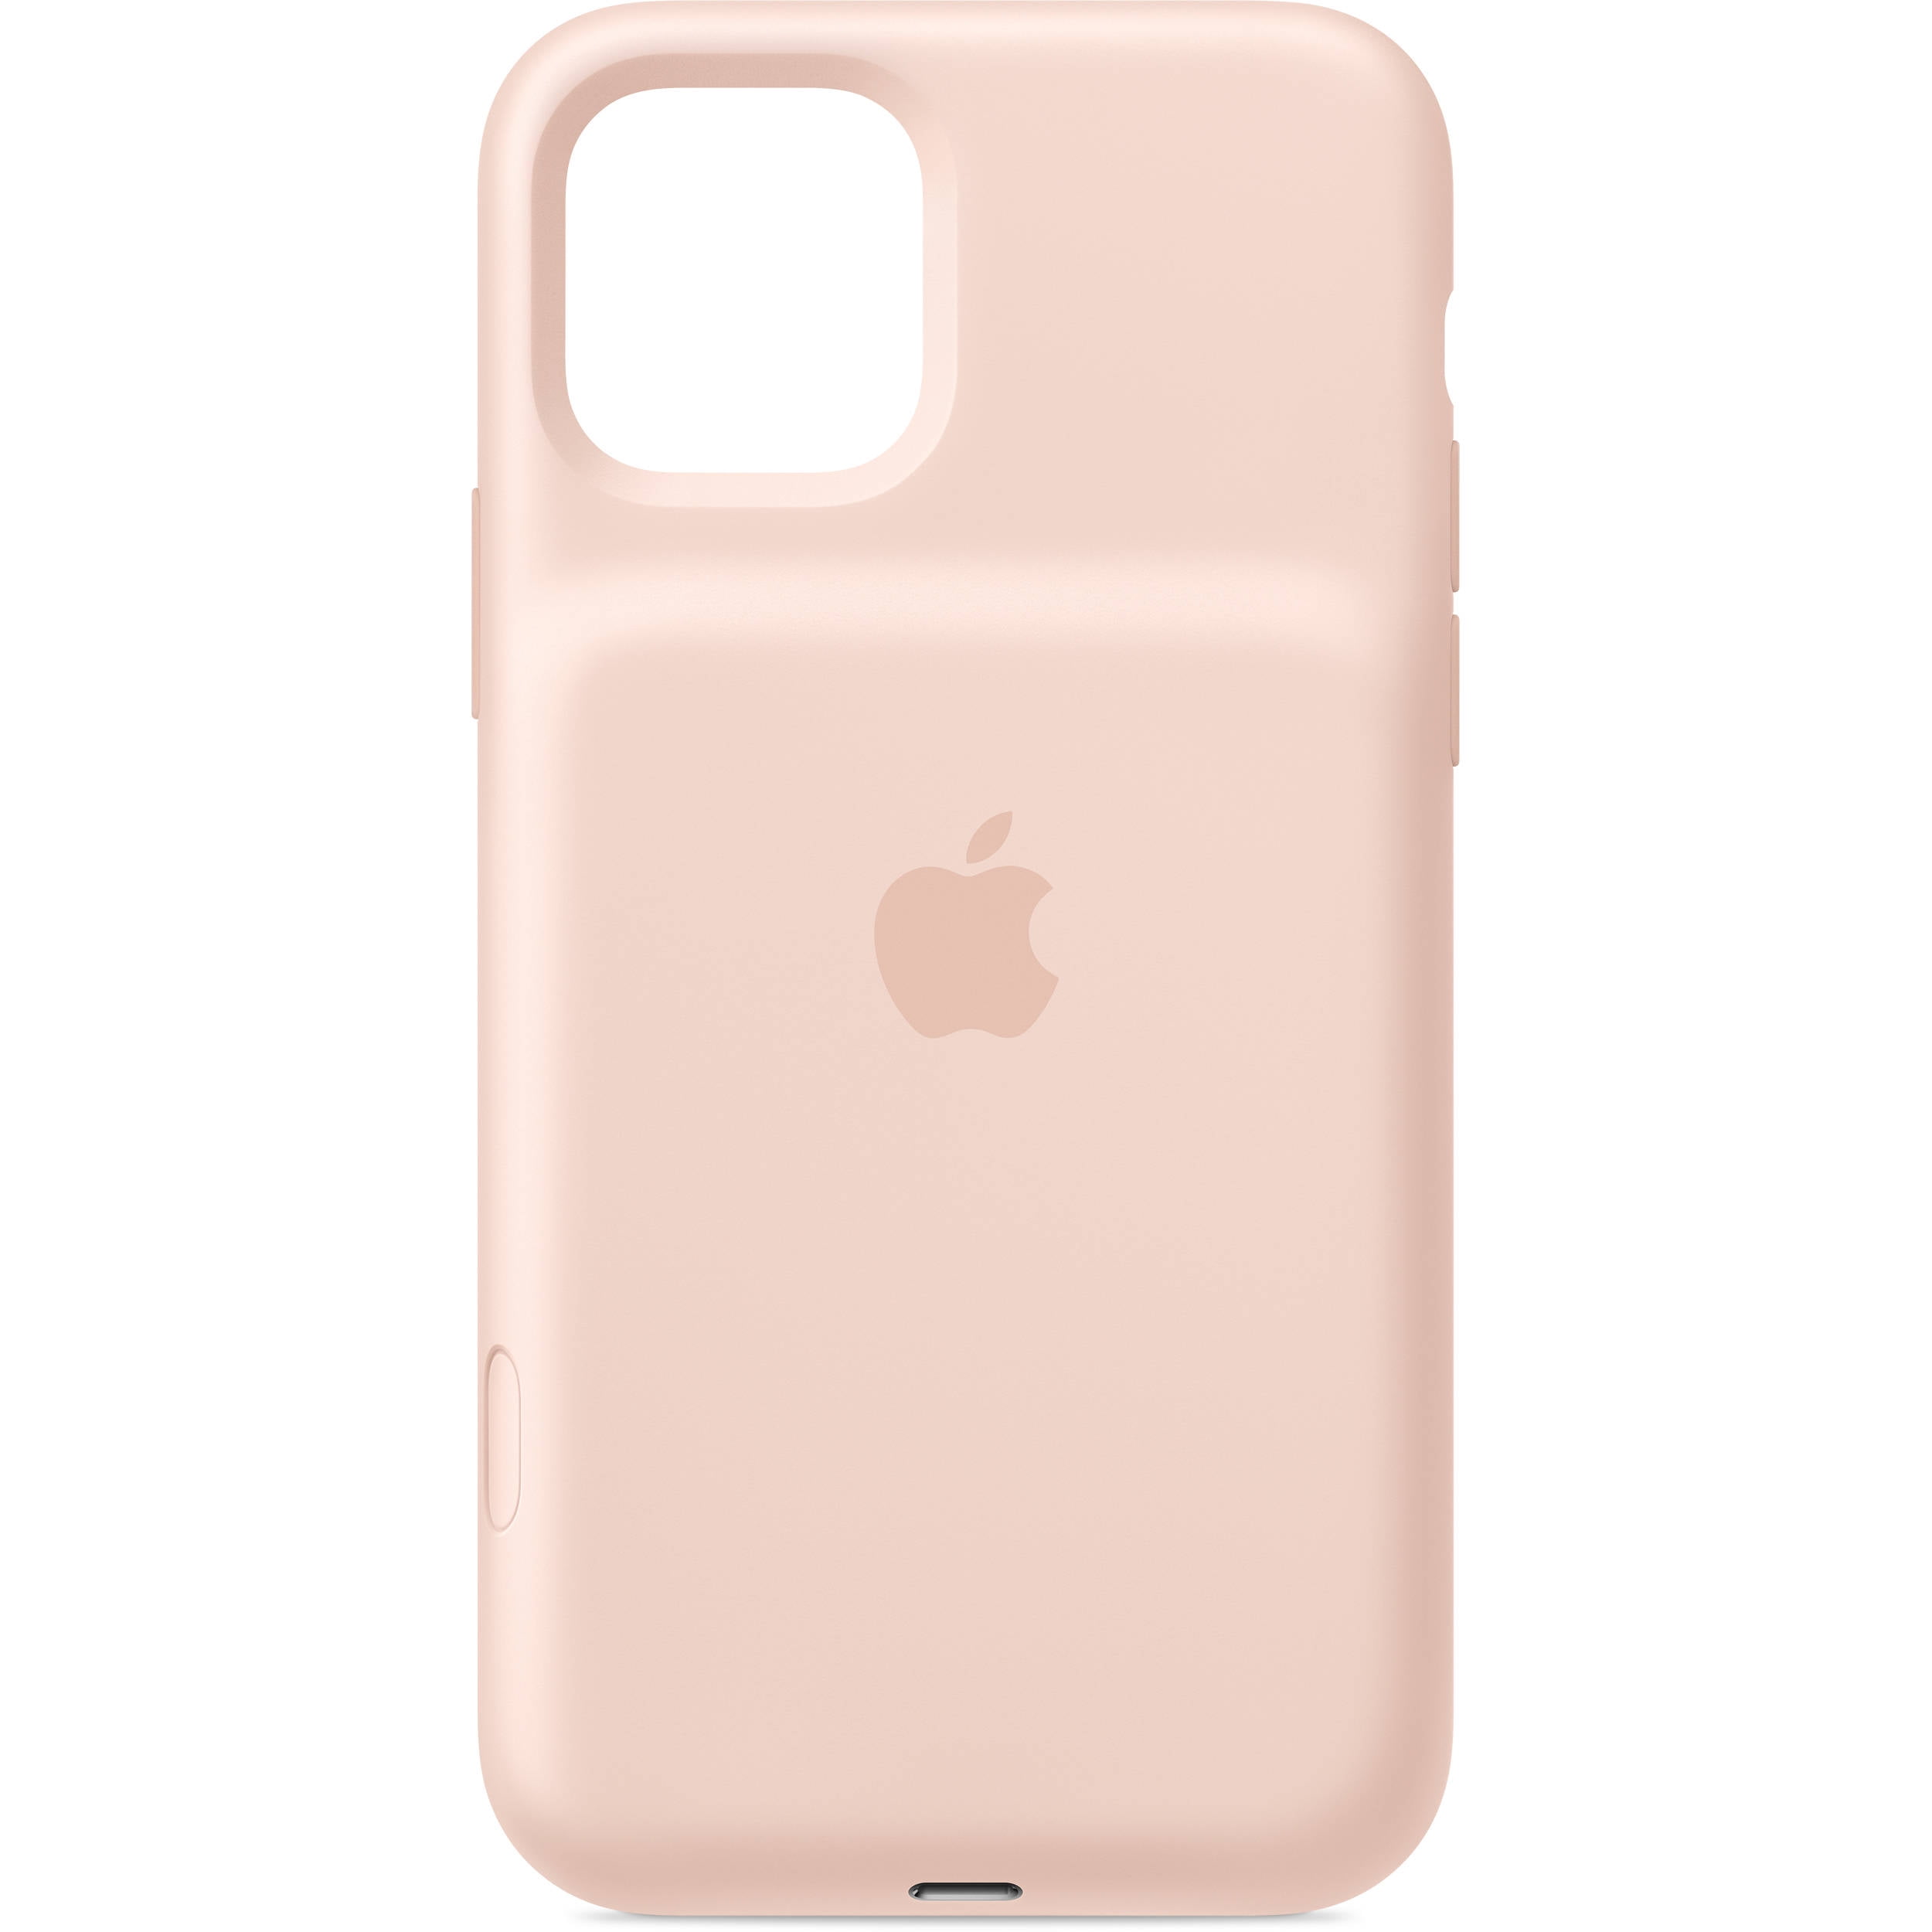 Apple Smart Battery Case iPhone 11 Pro Max Pink Sand ✓